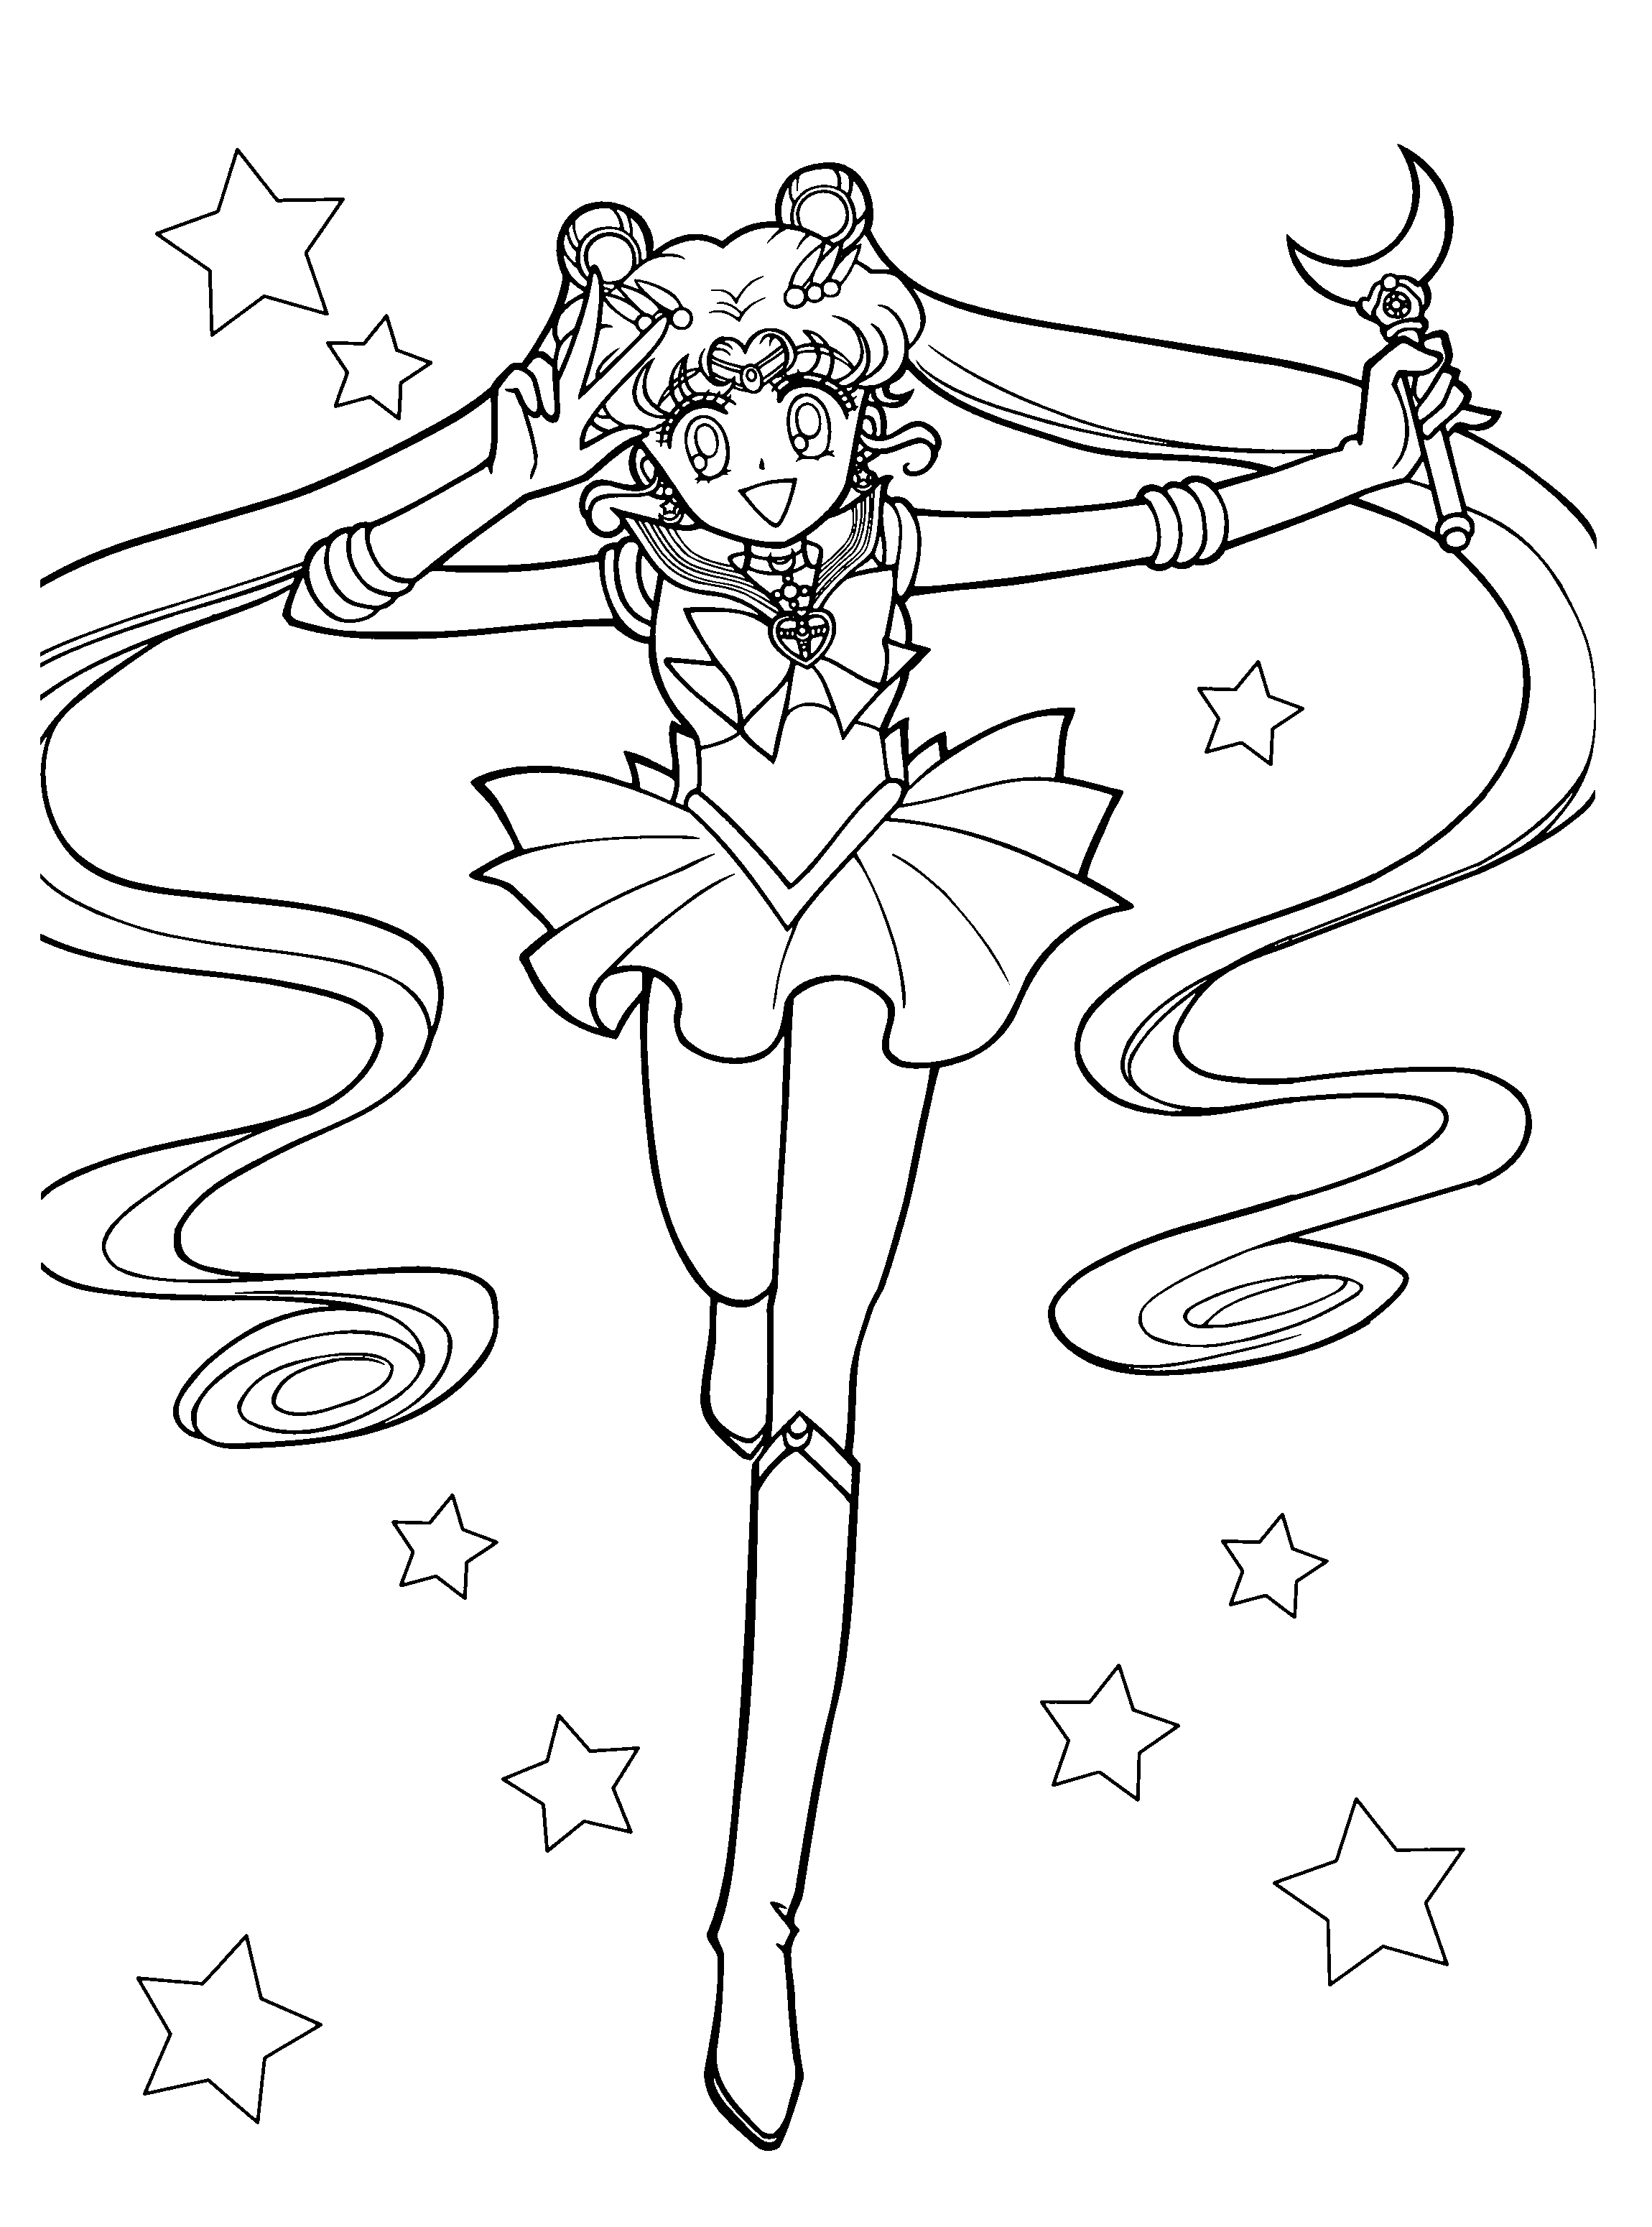 animated-coloring-pages-sailor-moon-image-0079